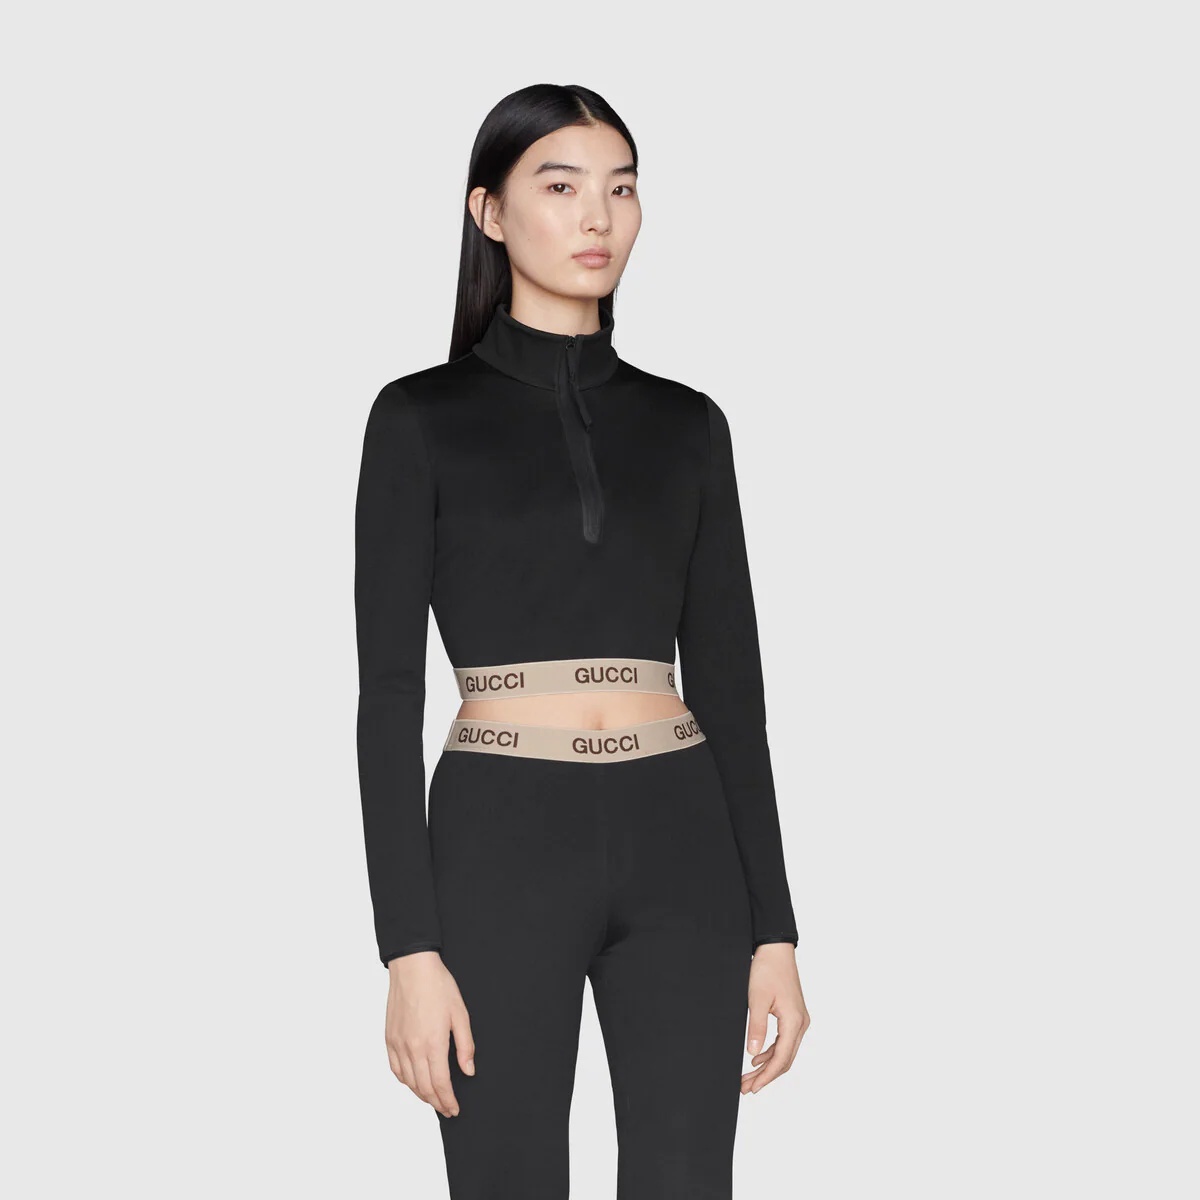 The North Face x Gucci cropped top - 3